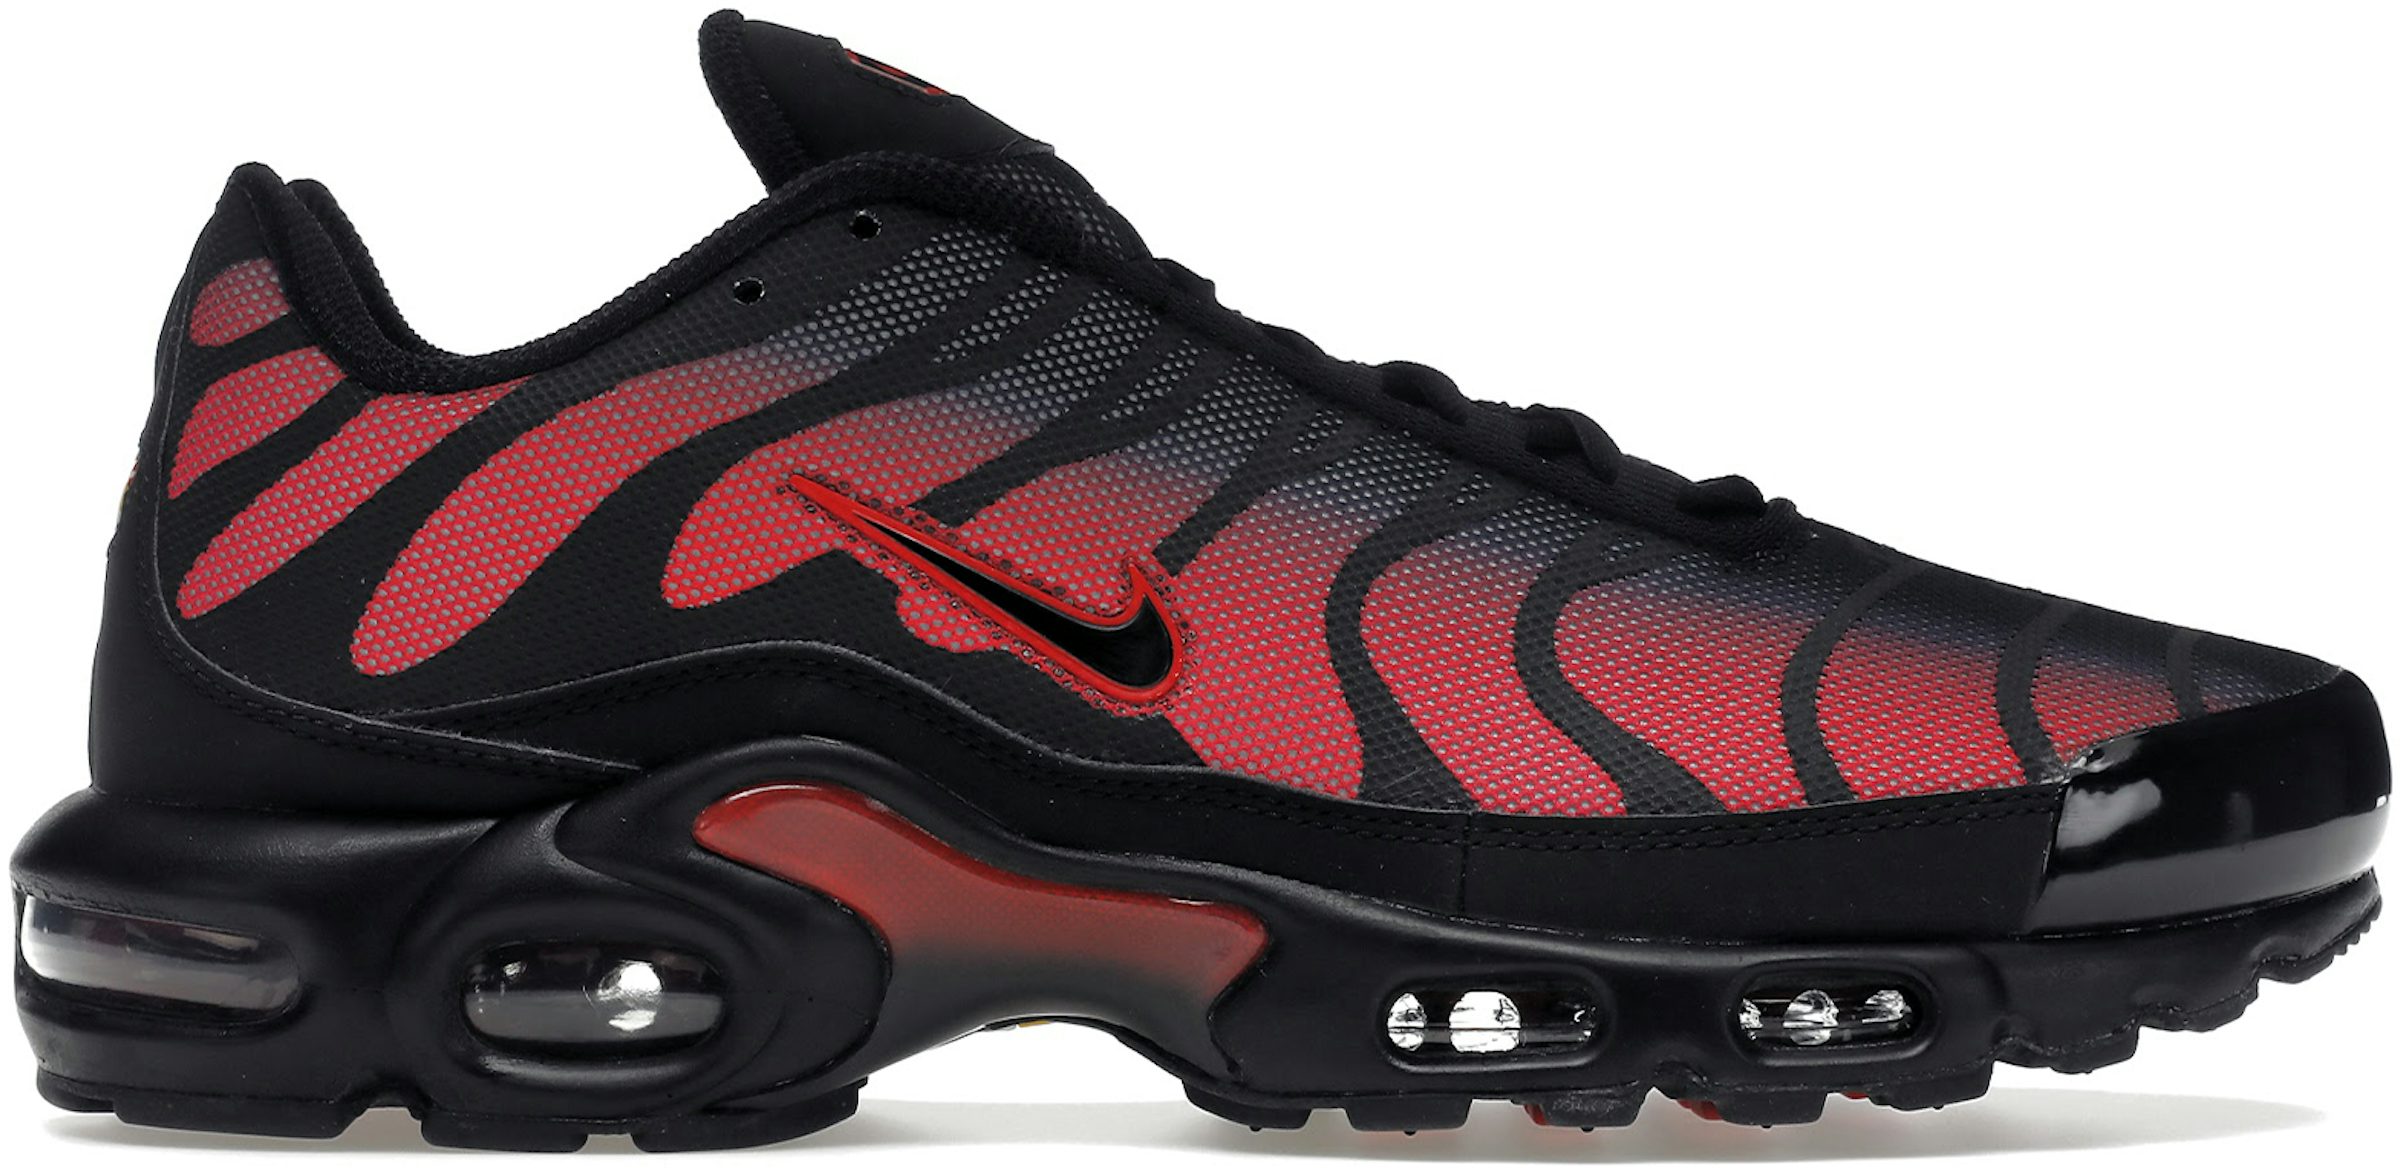 Over-Looked! Air Max Plus OG 'Tuned 1' Review & On Feet (Midnight